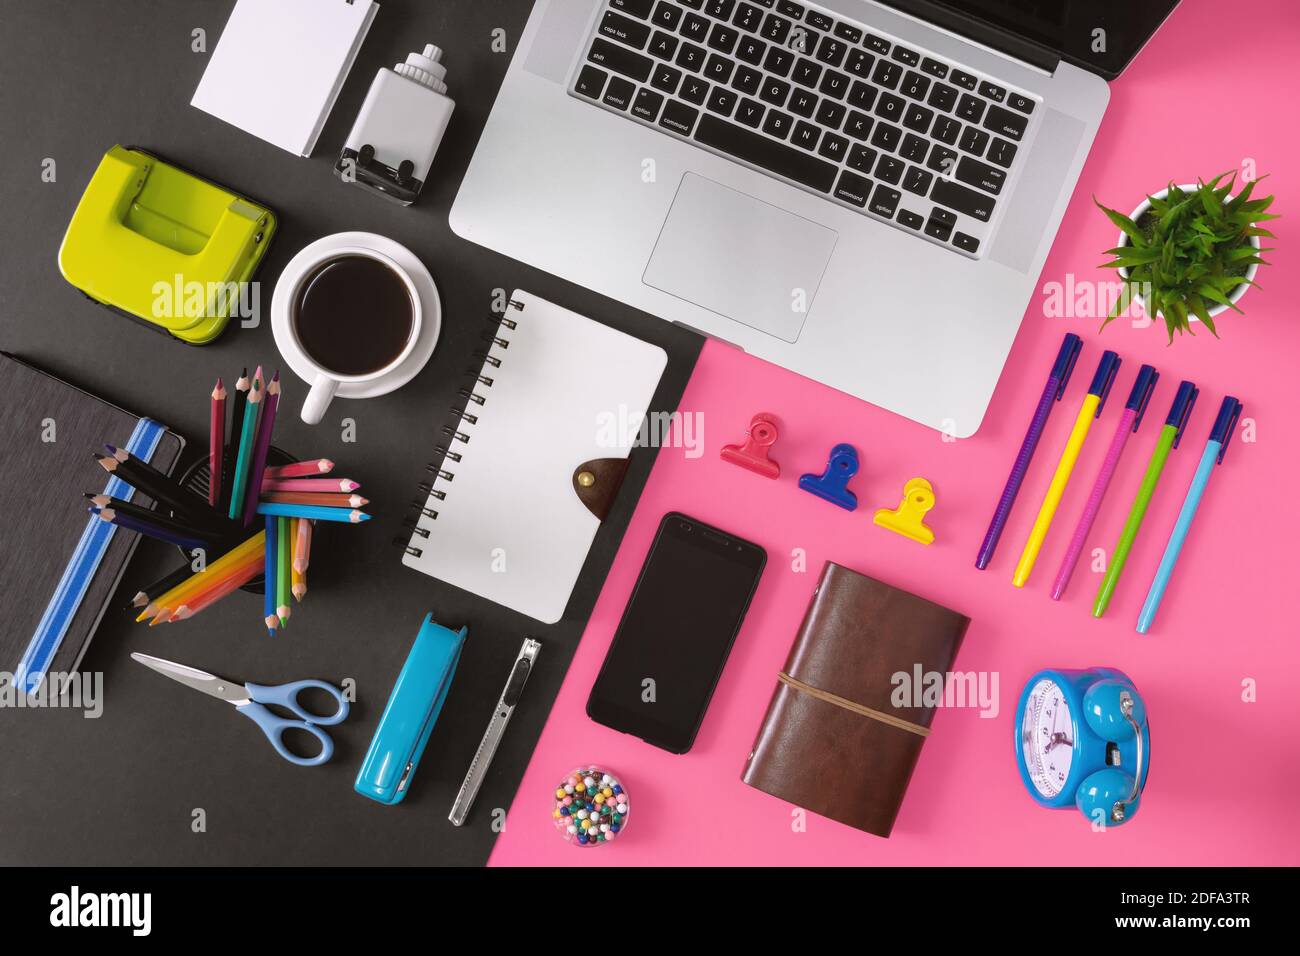 Office supply items, laptop and coffee on black and pink background.  Colorful and vibrant office table still life Stock Photo - Alamy